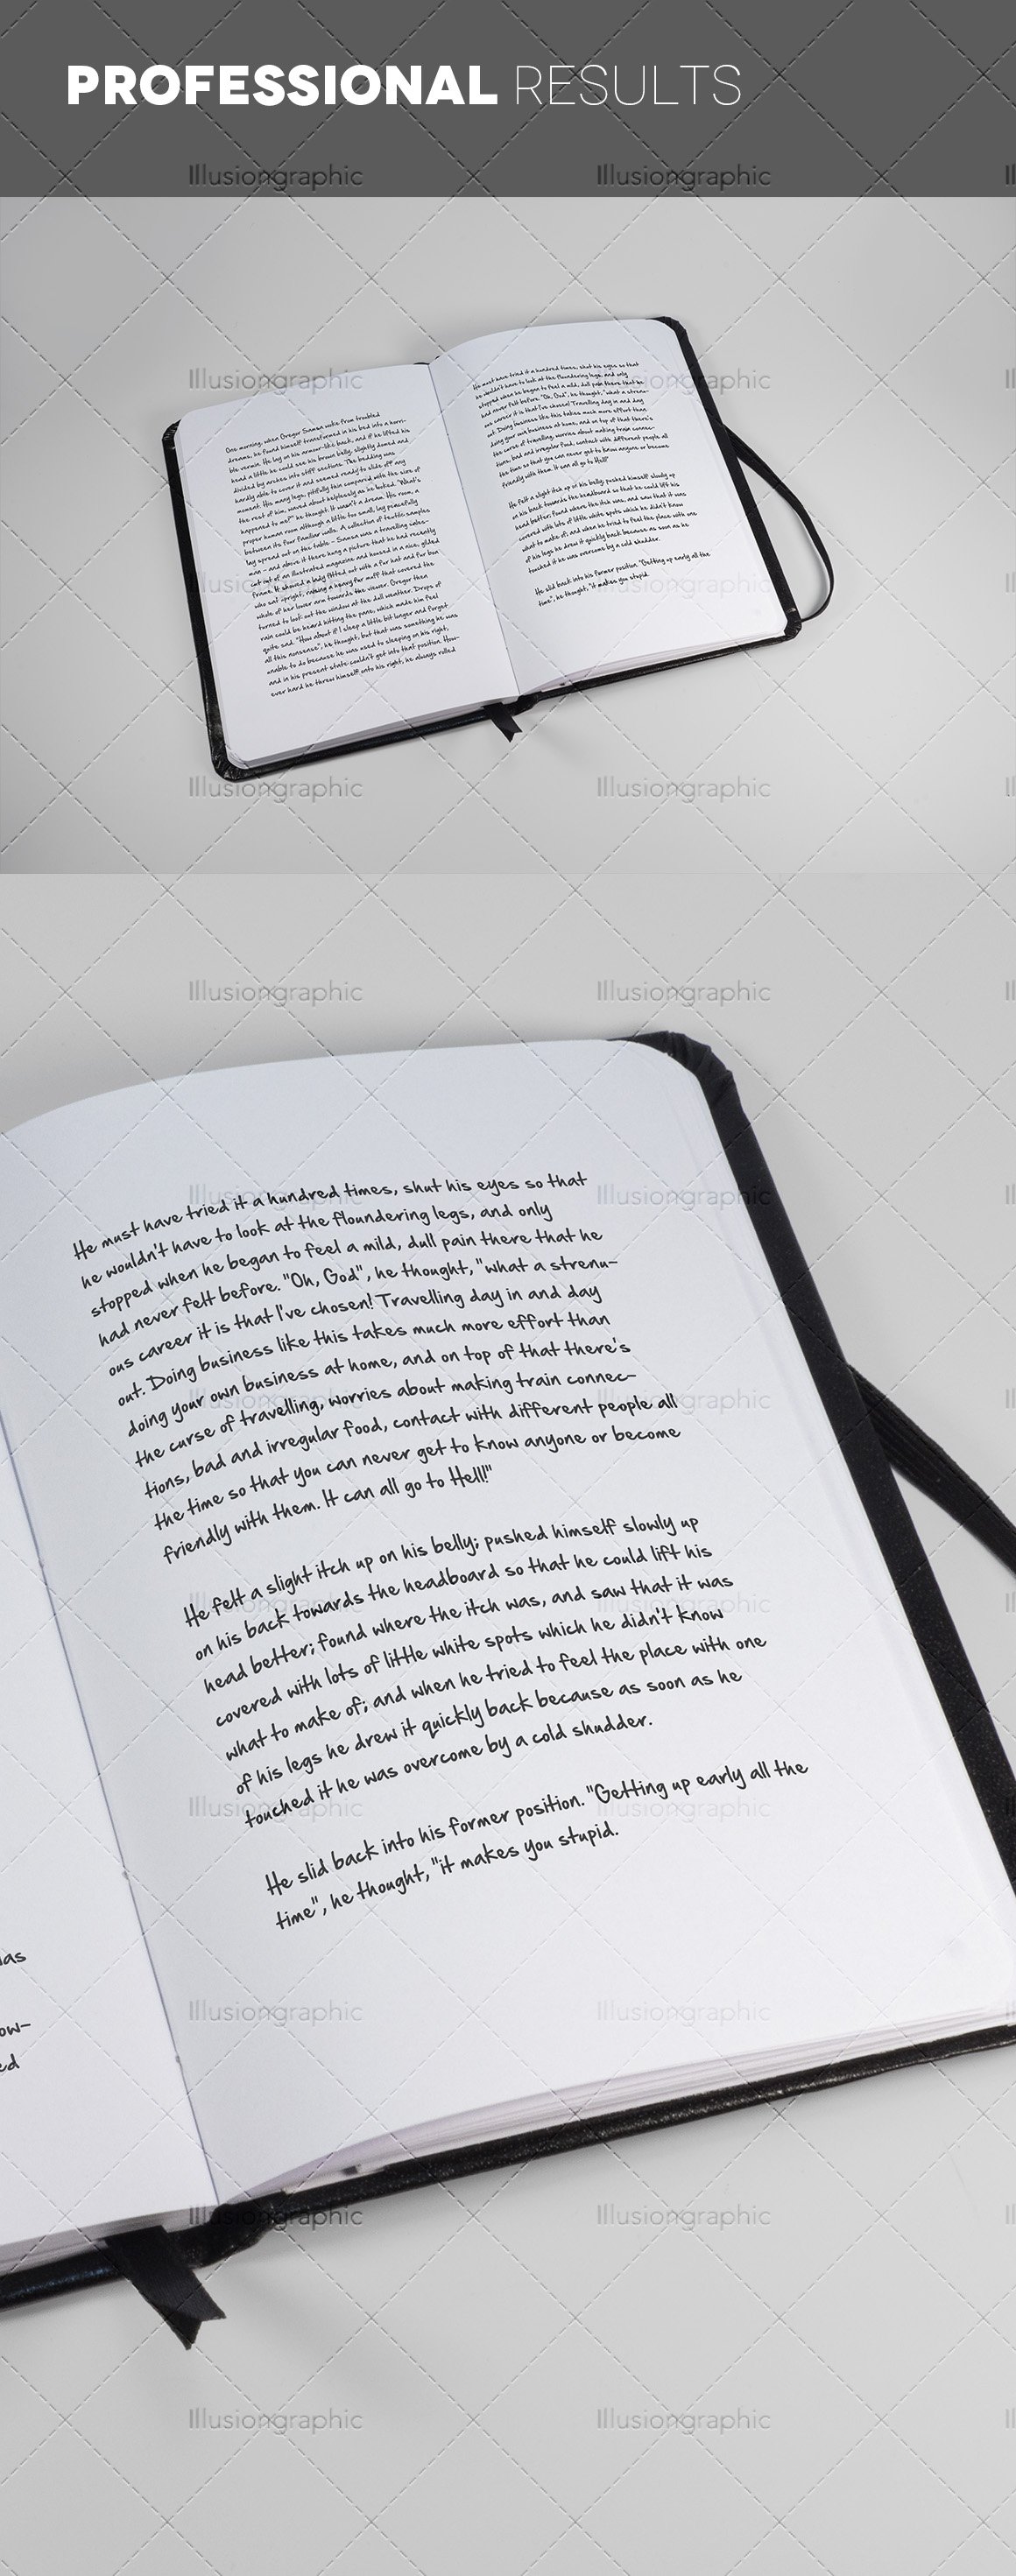 Pictures of a notebook in an expanded form with a wonderful design.